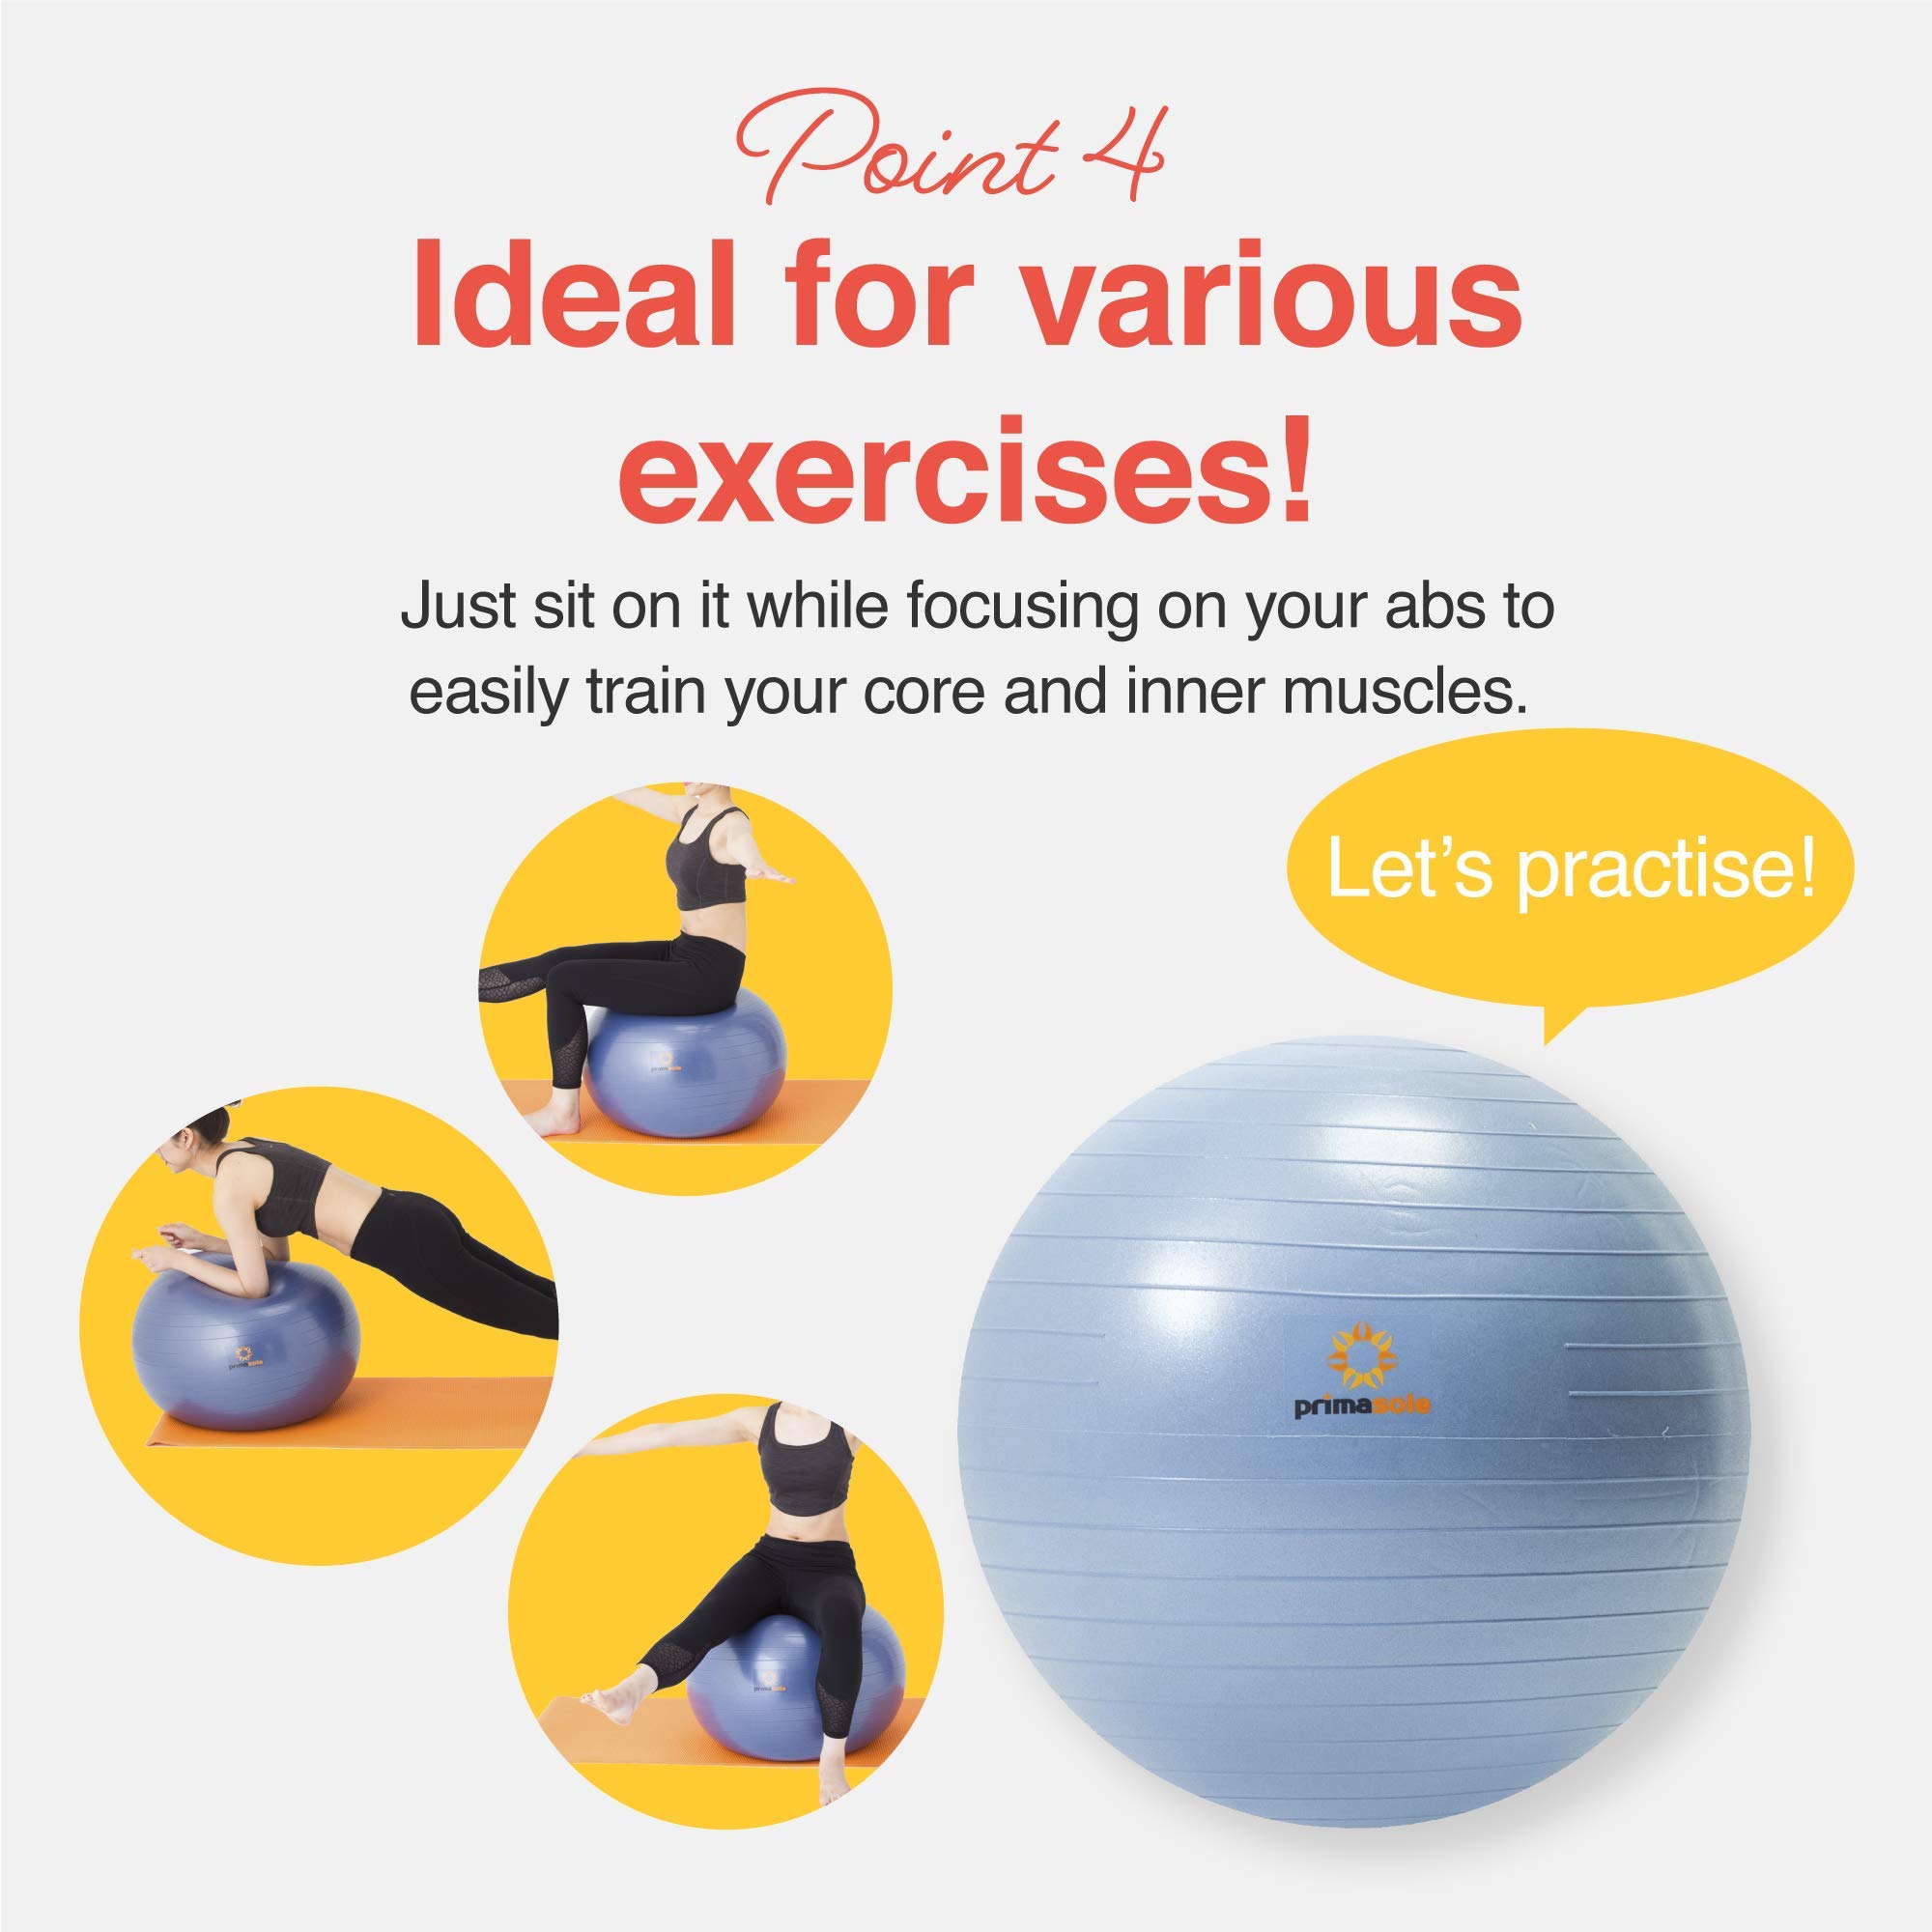 Primasole Exercise Ball for Balance Stability Fitness Workout Yoga Pilates at Home Office & Gym with Inflator Pump